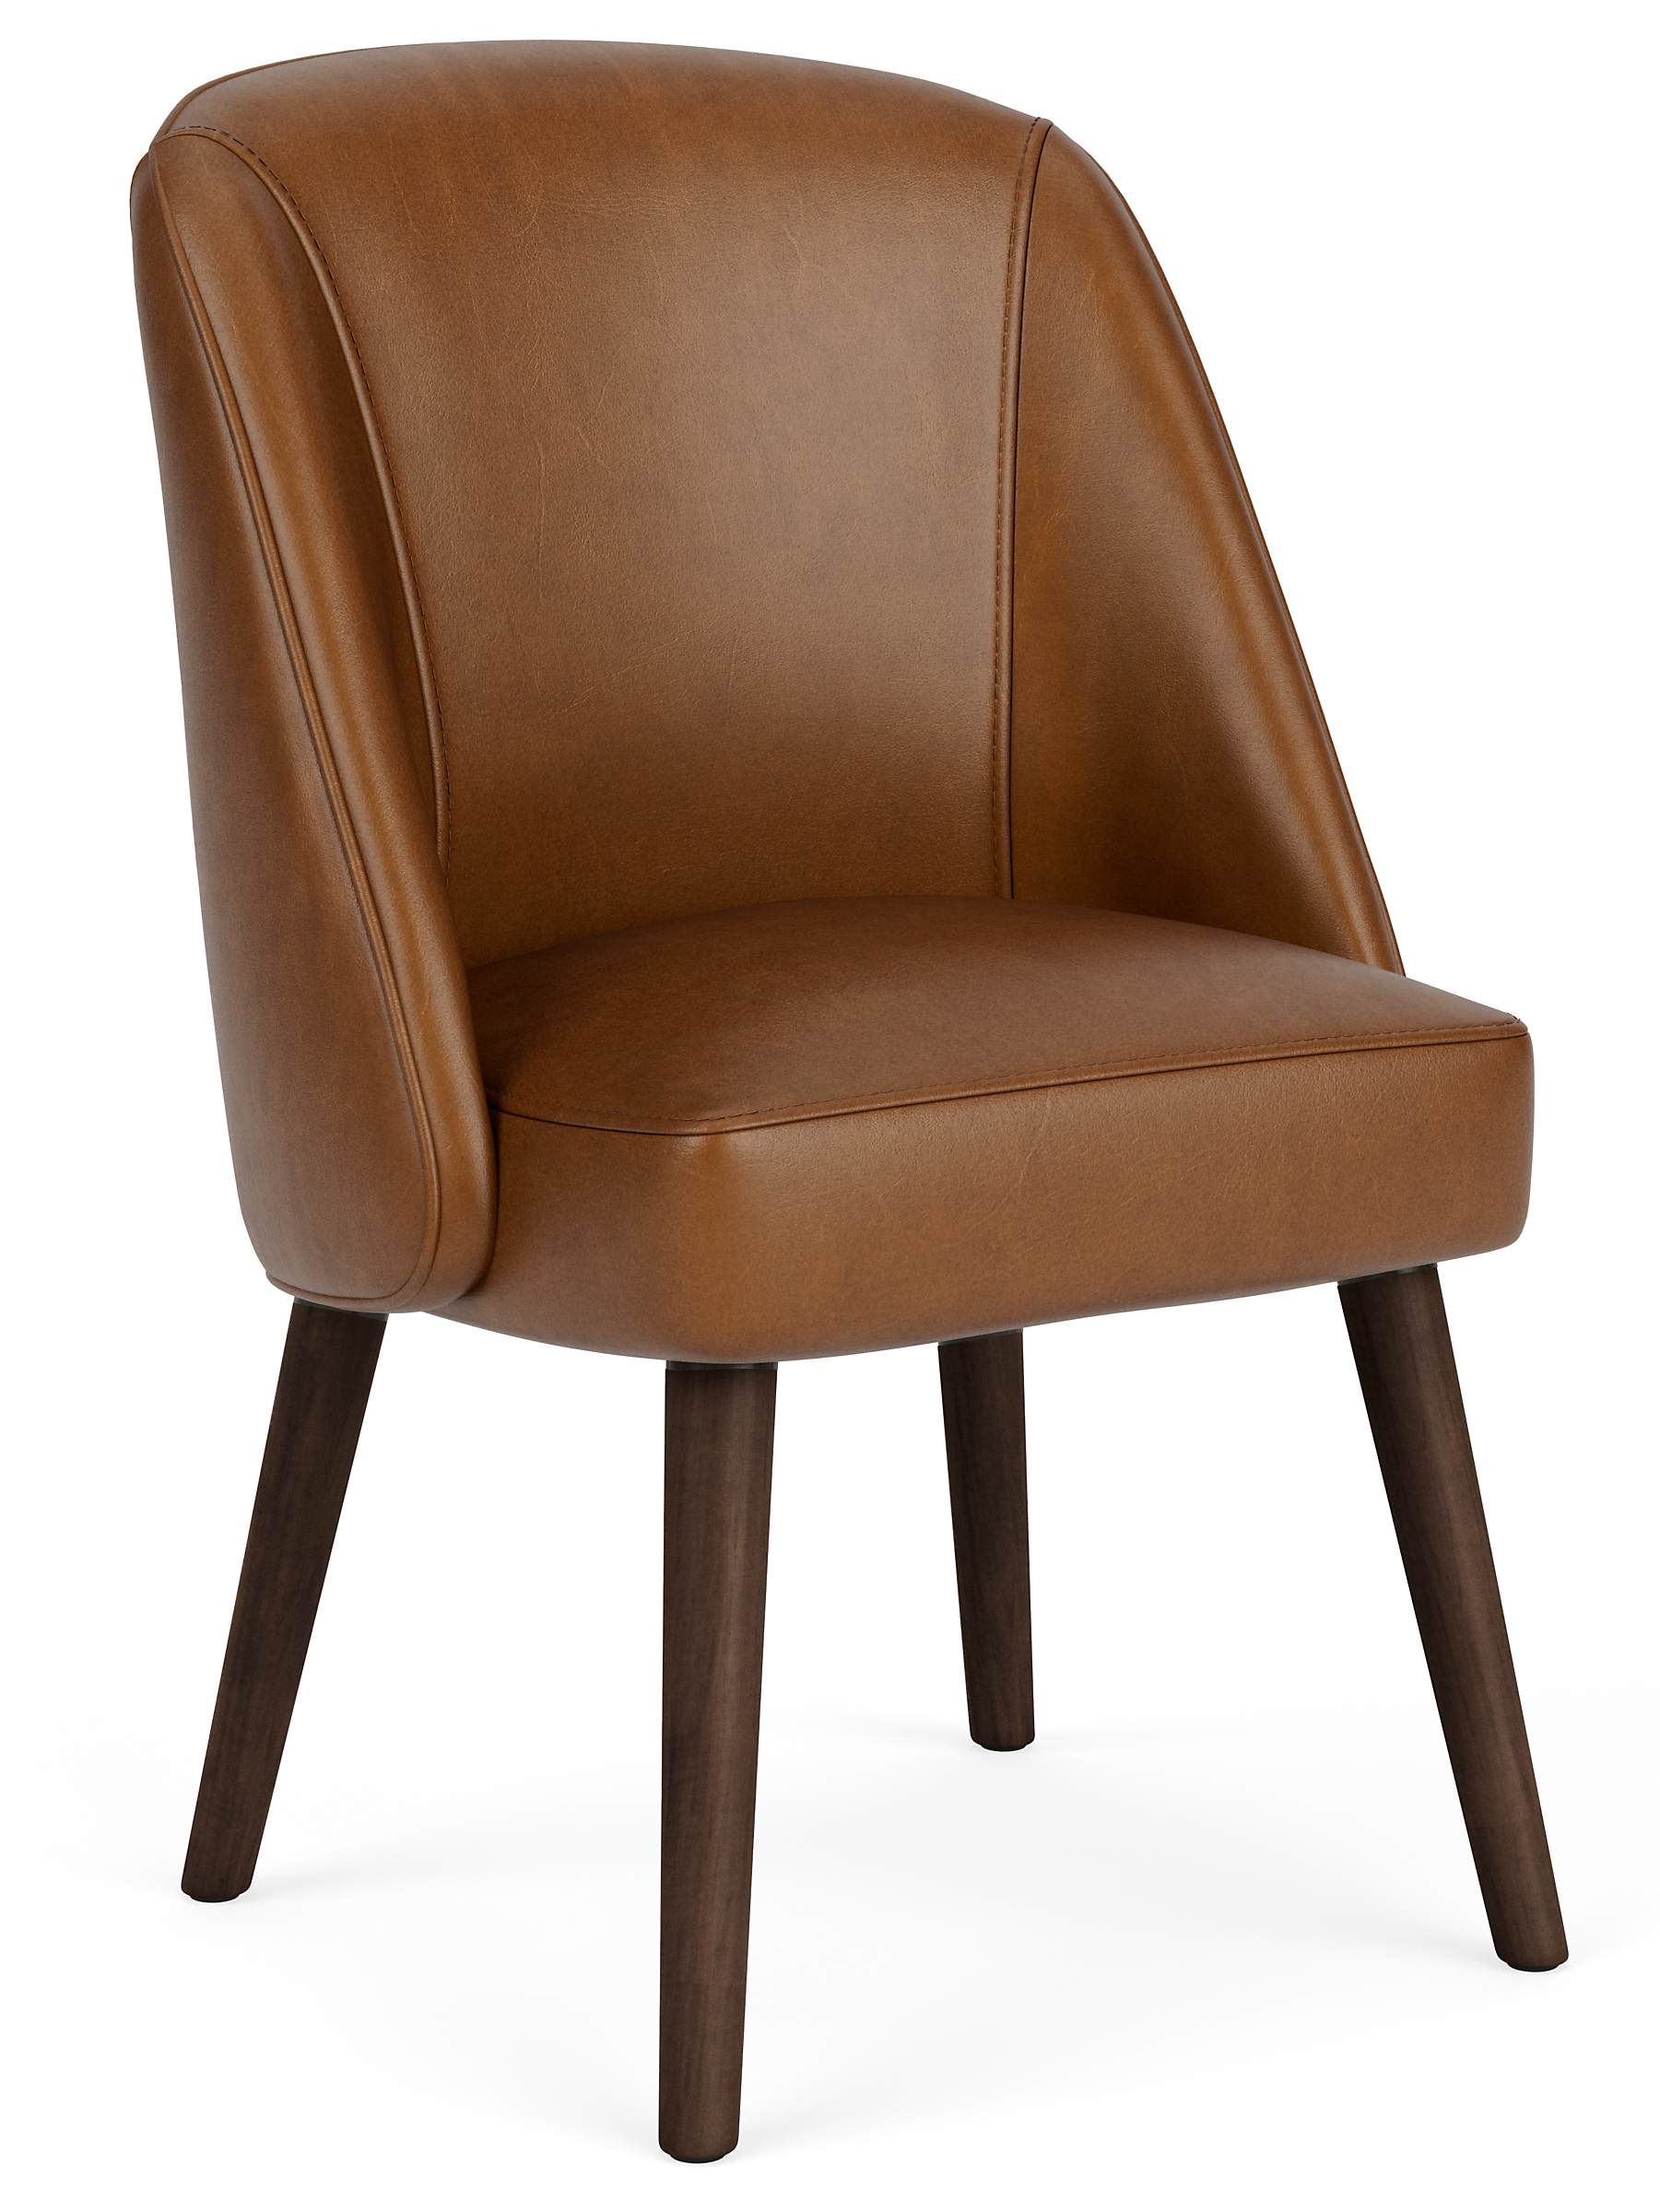 Cora Side Chair in Vento Cognac Leather with Charcoal Legs